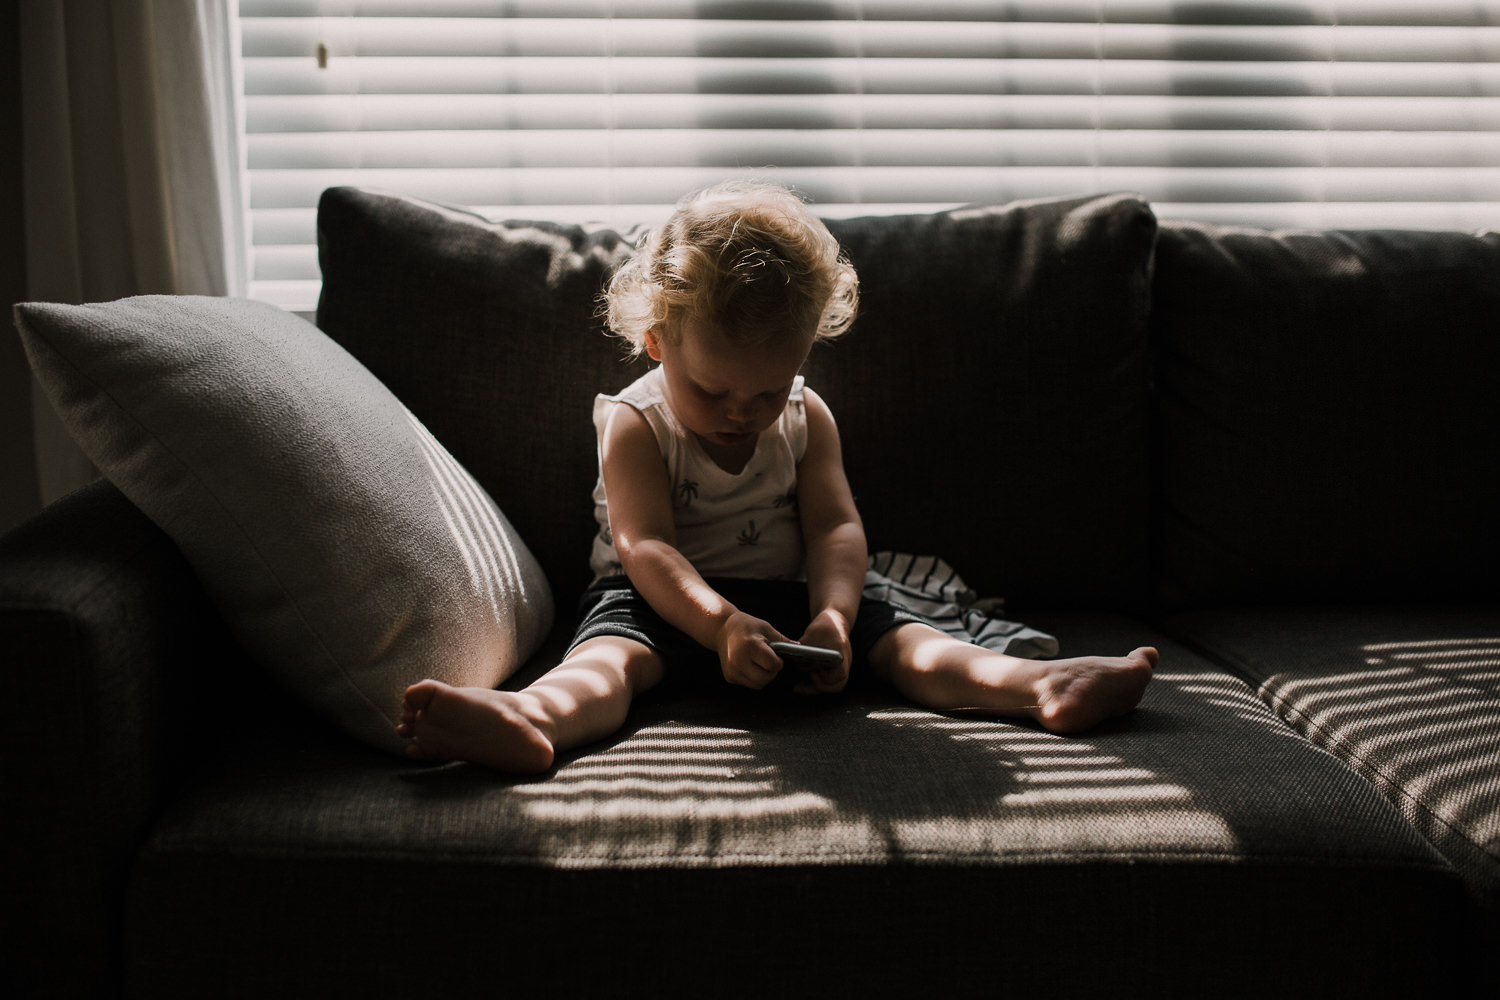 18 month old boy with curly hair sitting in harsh light on couch looking at phone - Stouffville Documentary Photographer